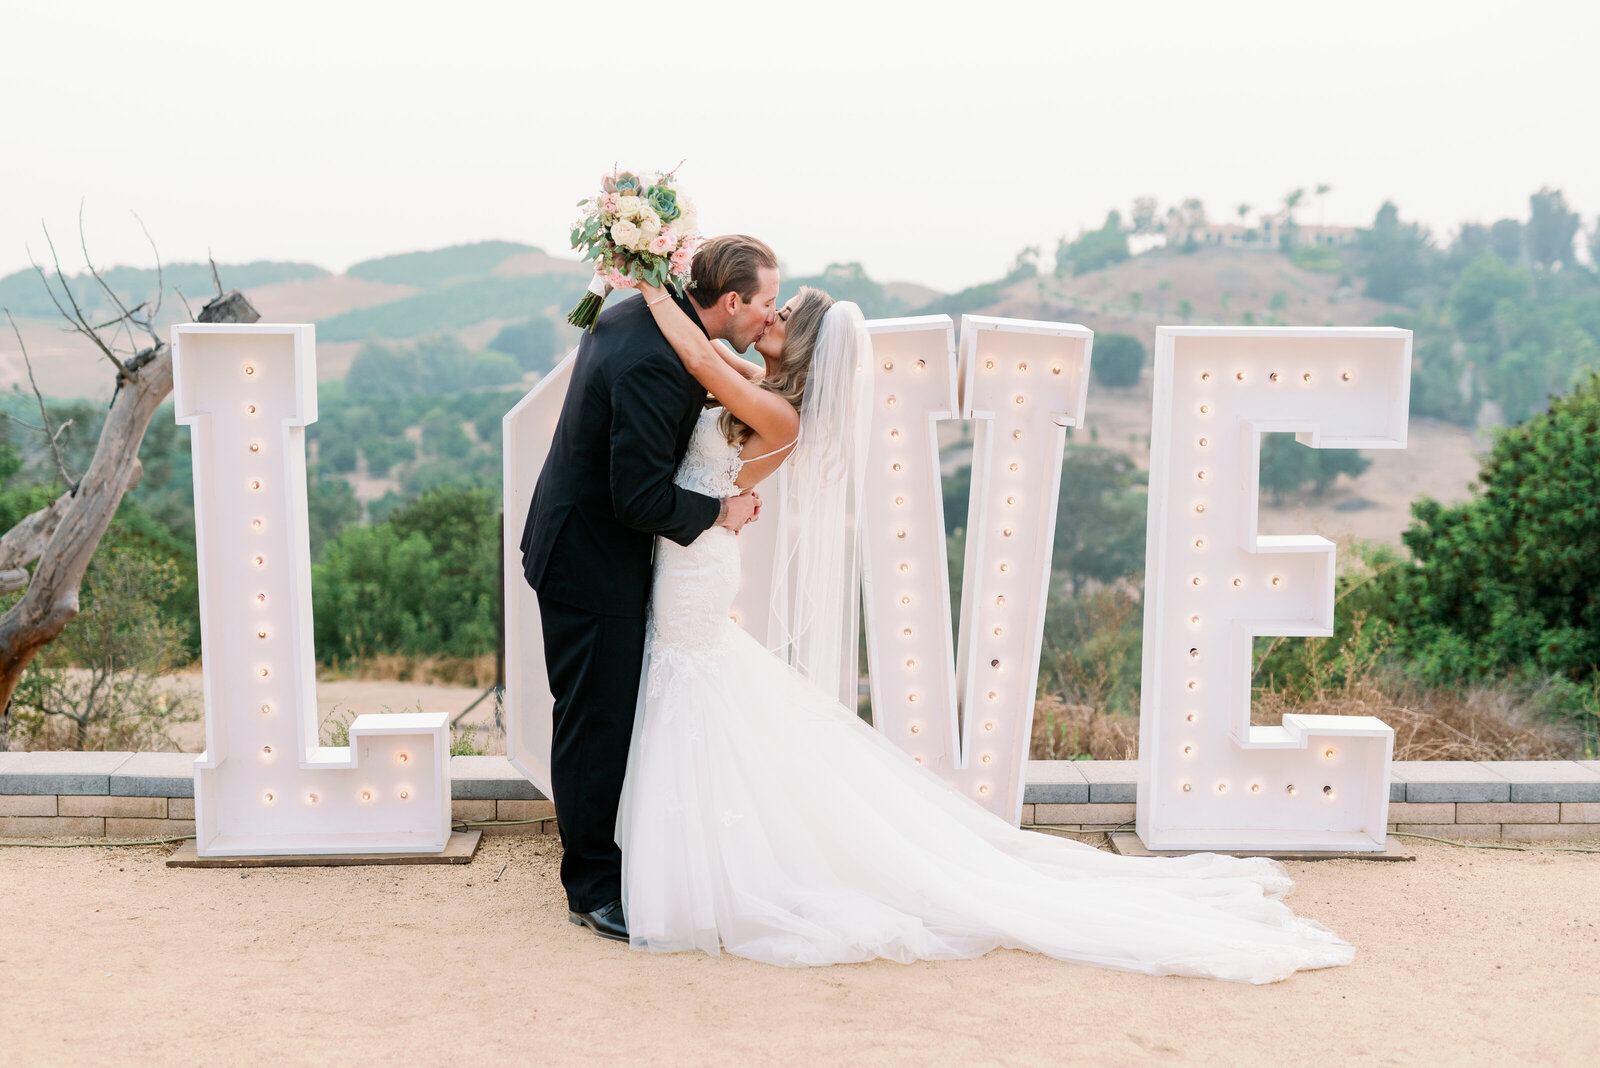 Bride and groom with Love sign, Temecula photography